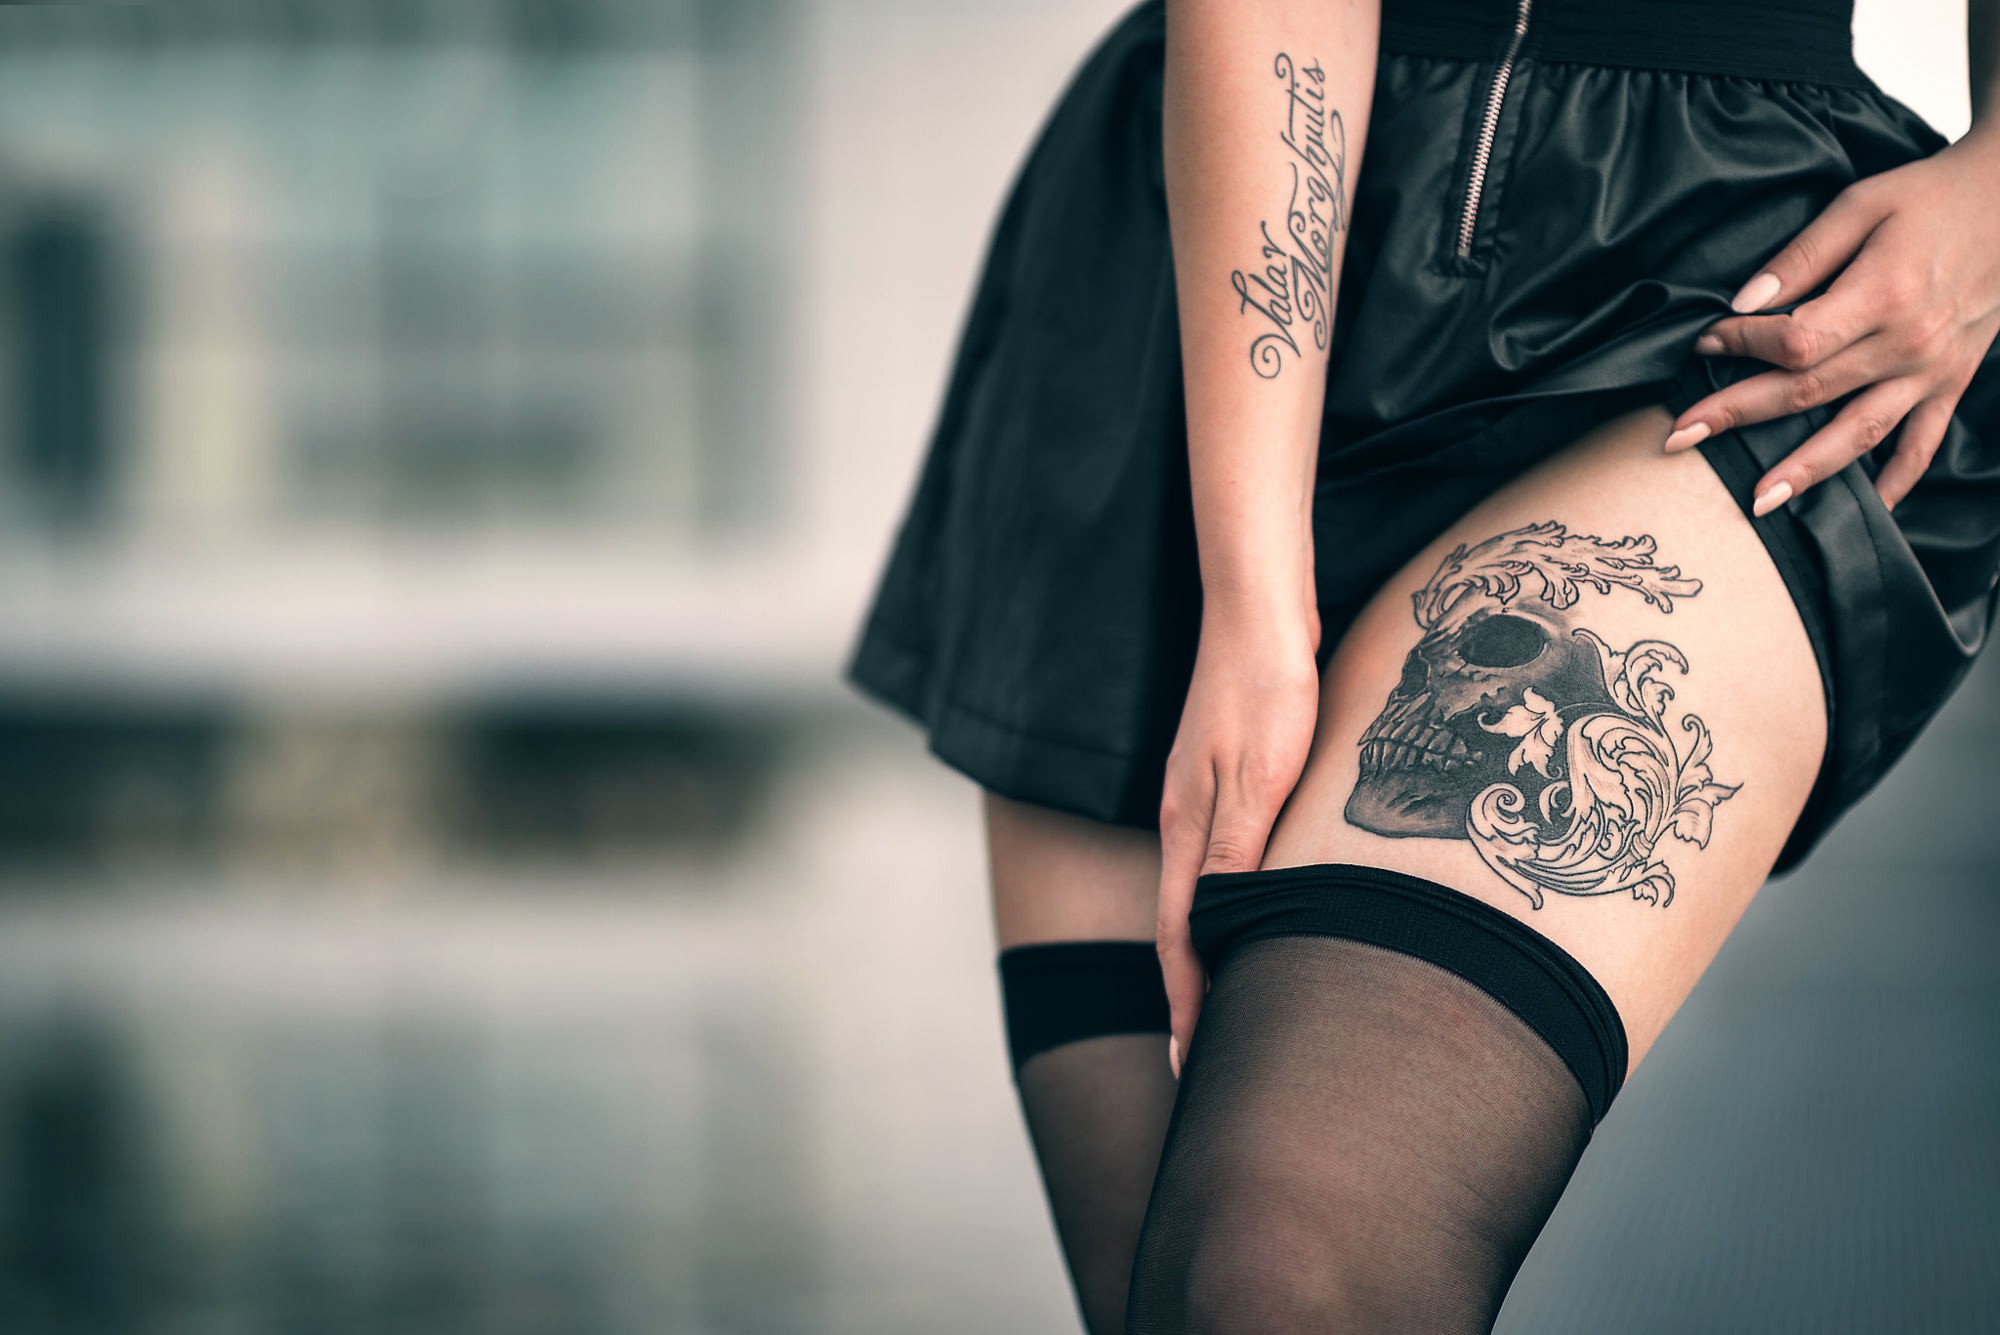 girl leg tattoo stockings free awesome image for mobile